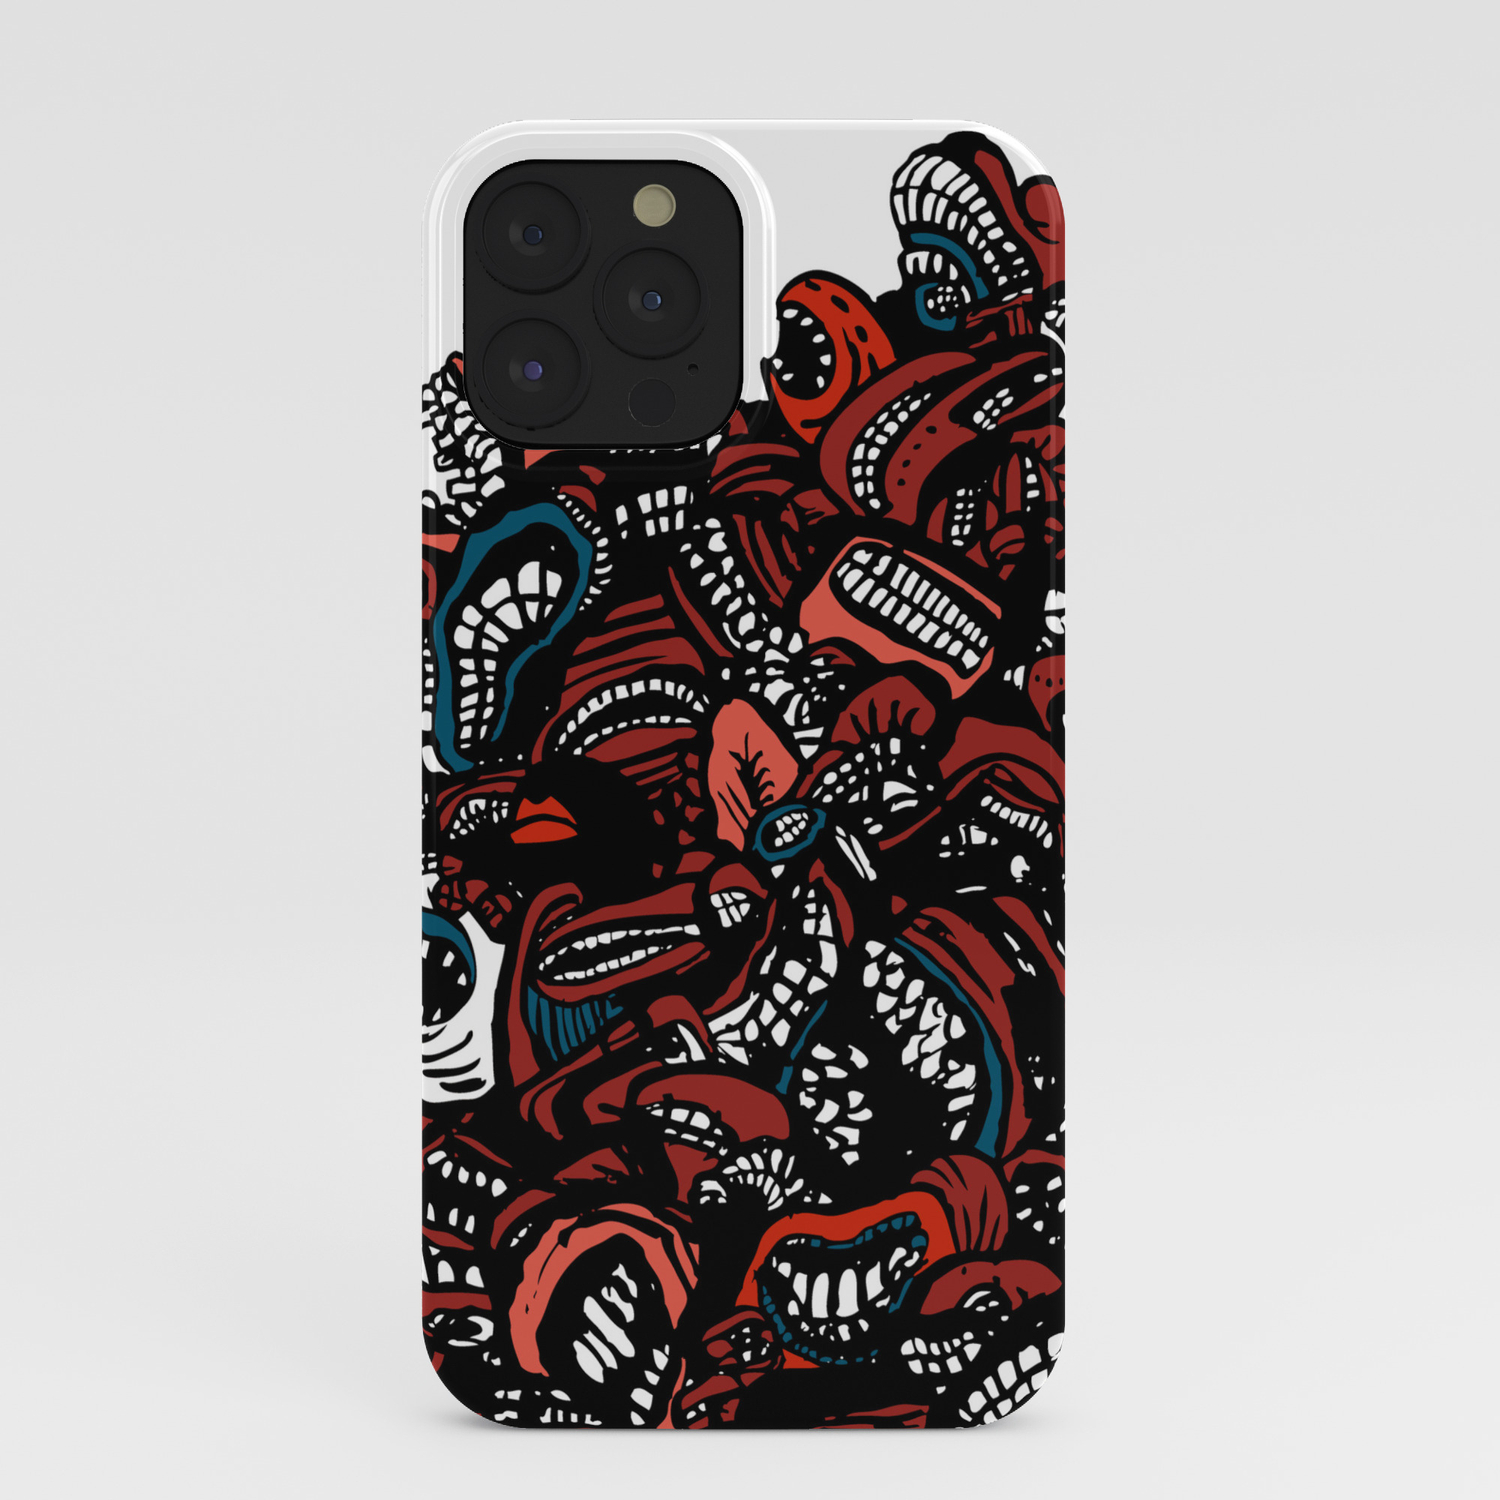 The chattering class -alt iPhone Case by nina eide holtan | Society6